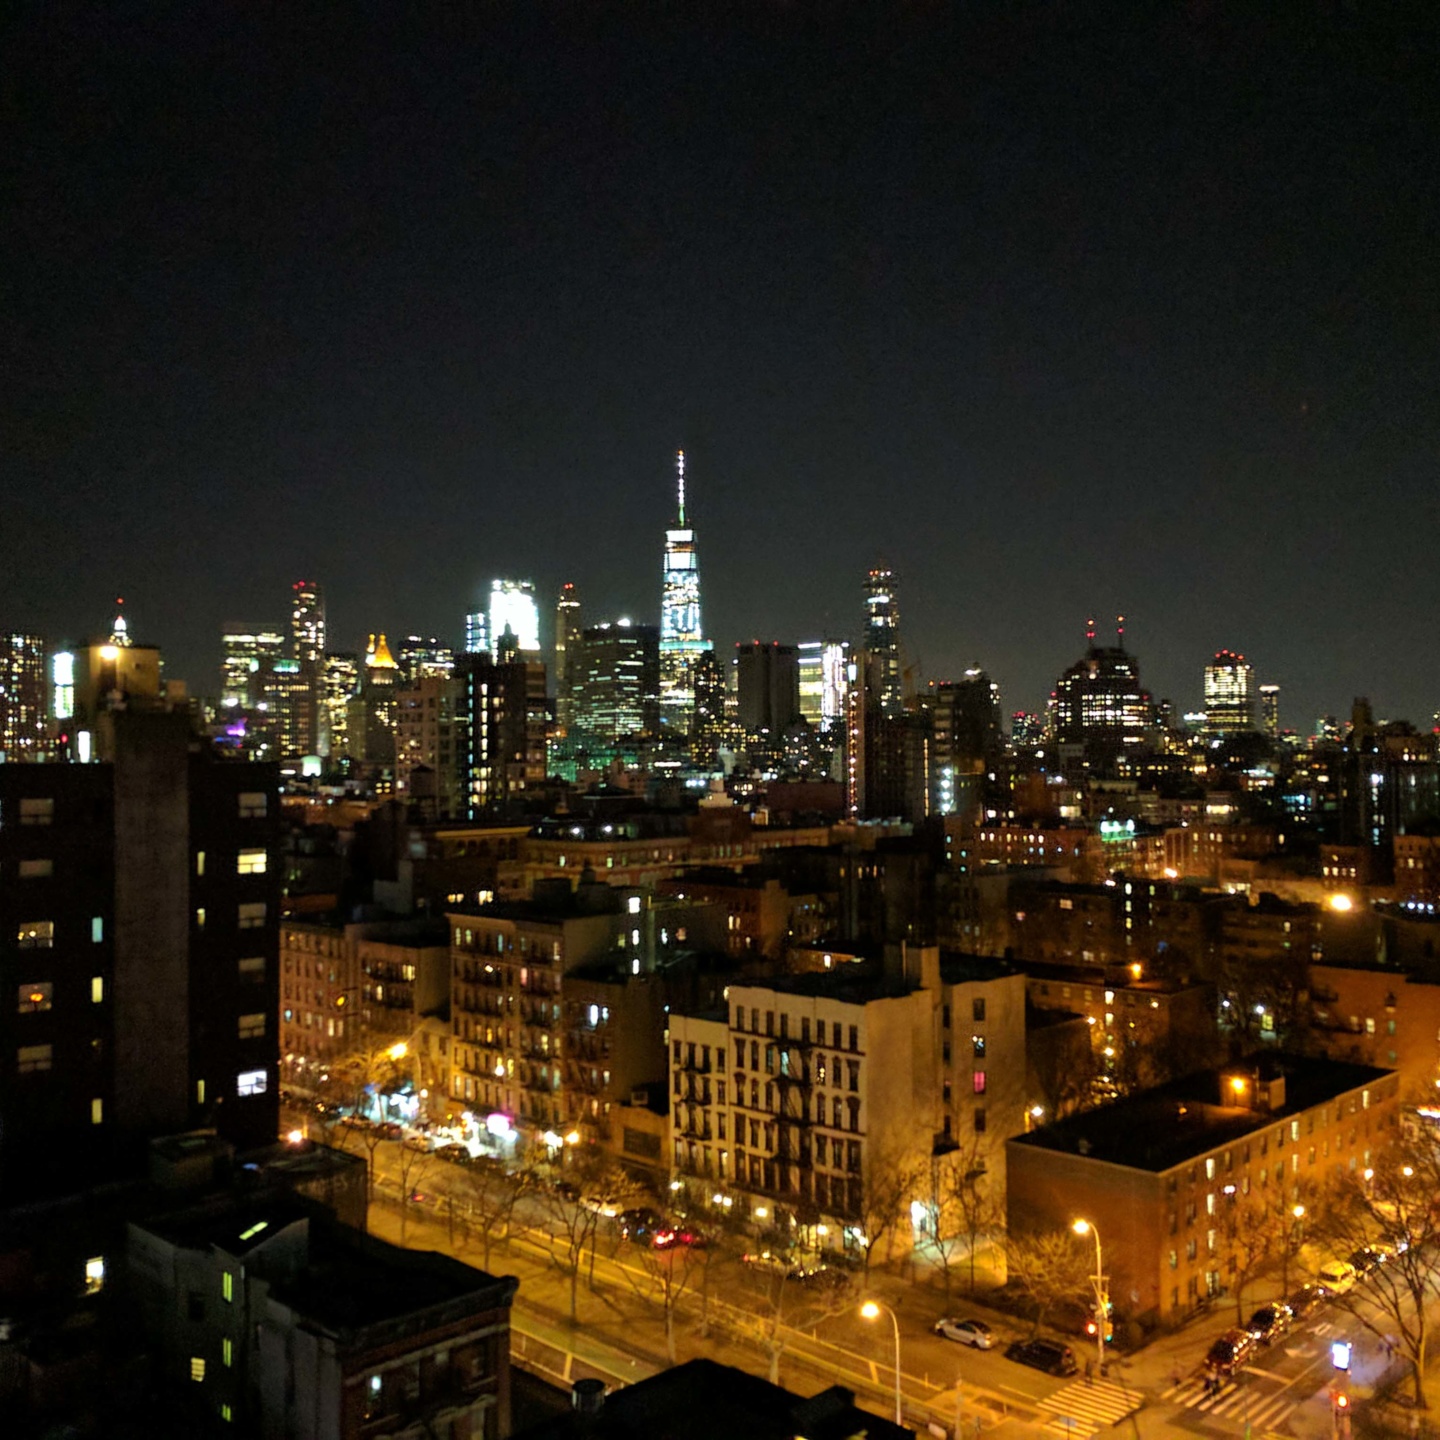 Review: Hotel Indigo Lower East Side New York – Kicked off Rooftop Deck for Having a Camera…..